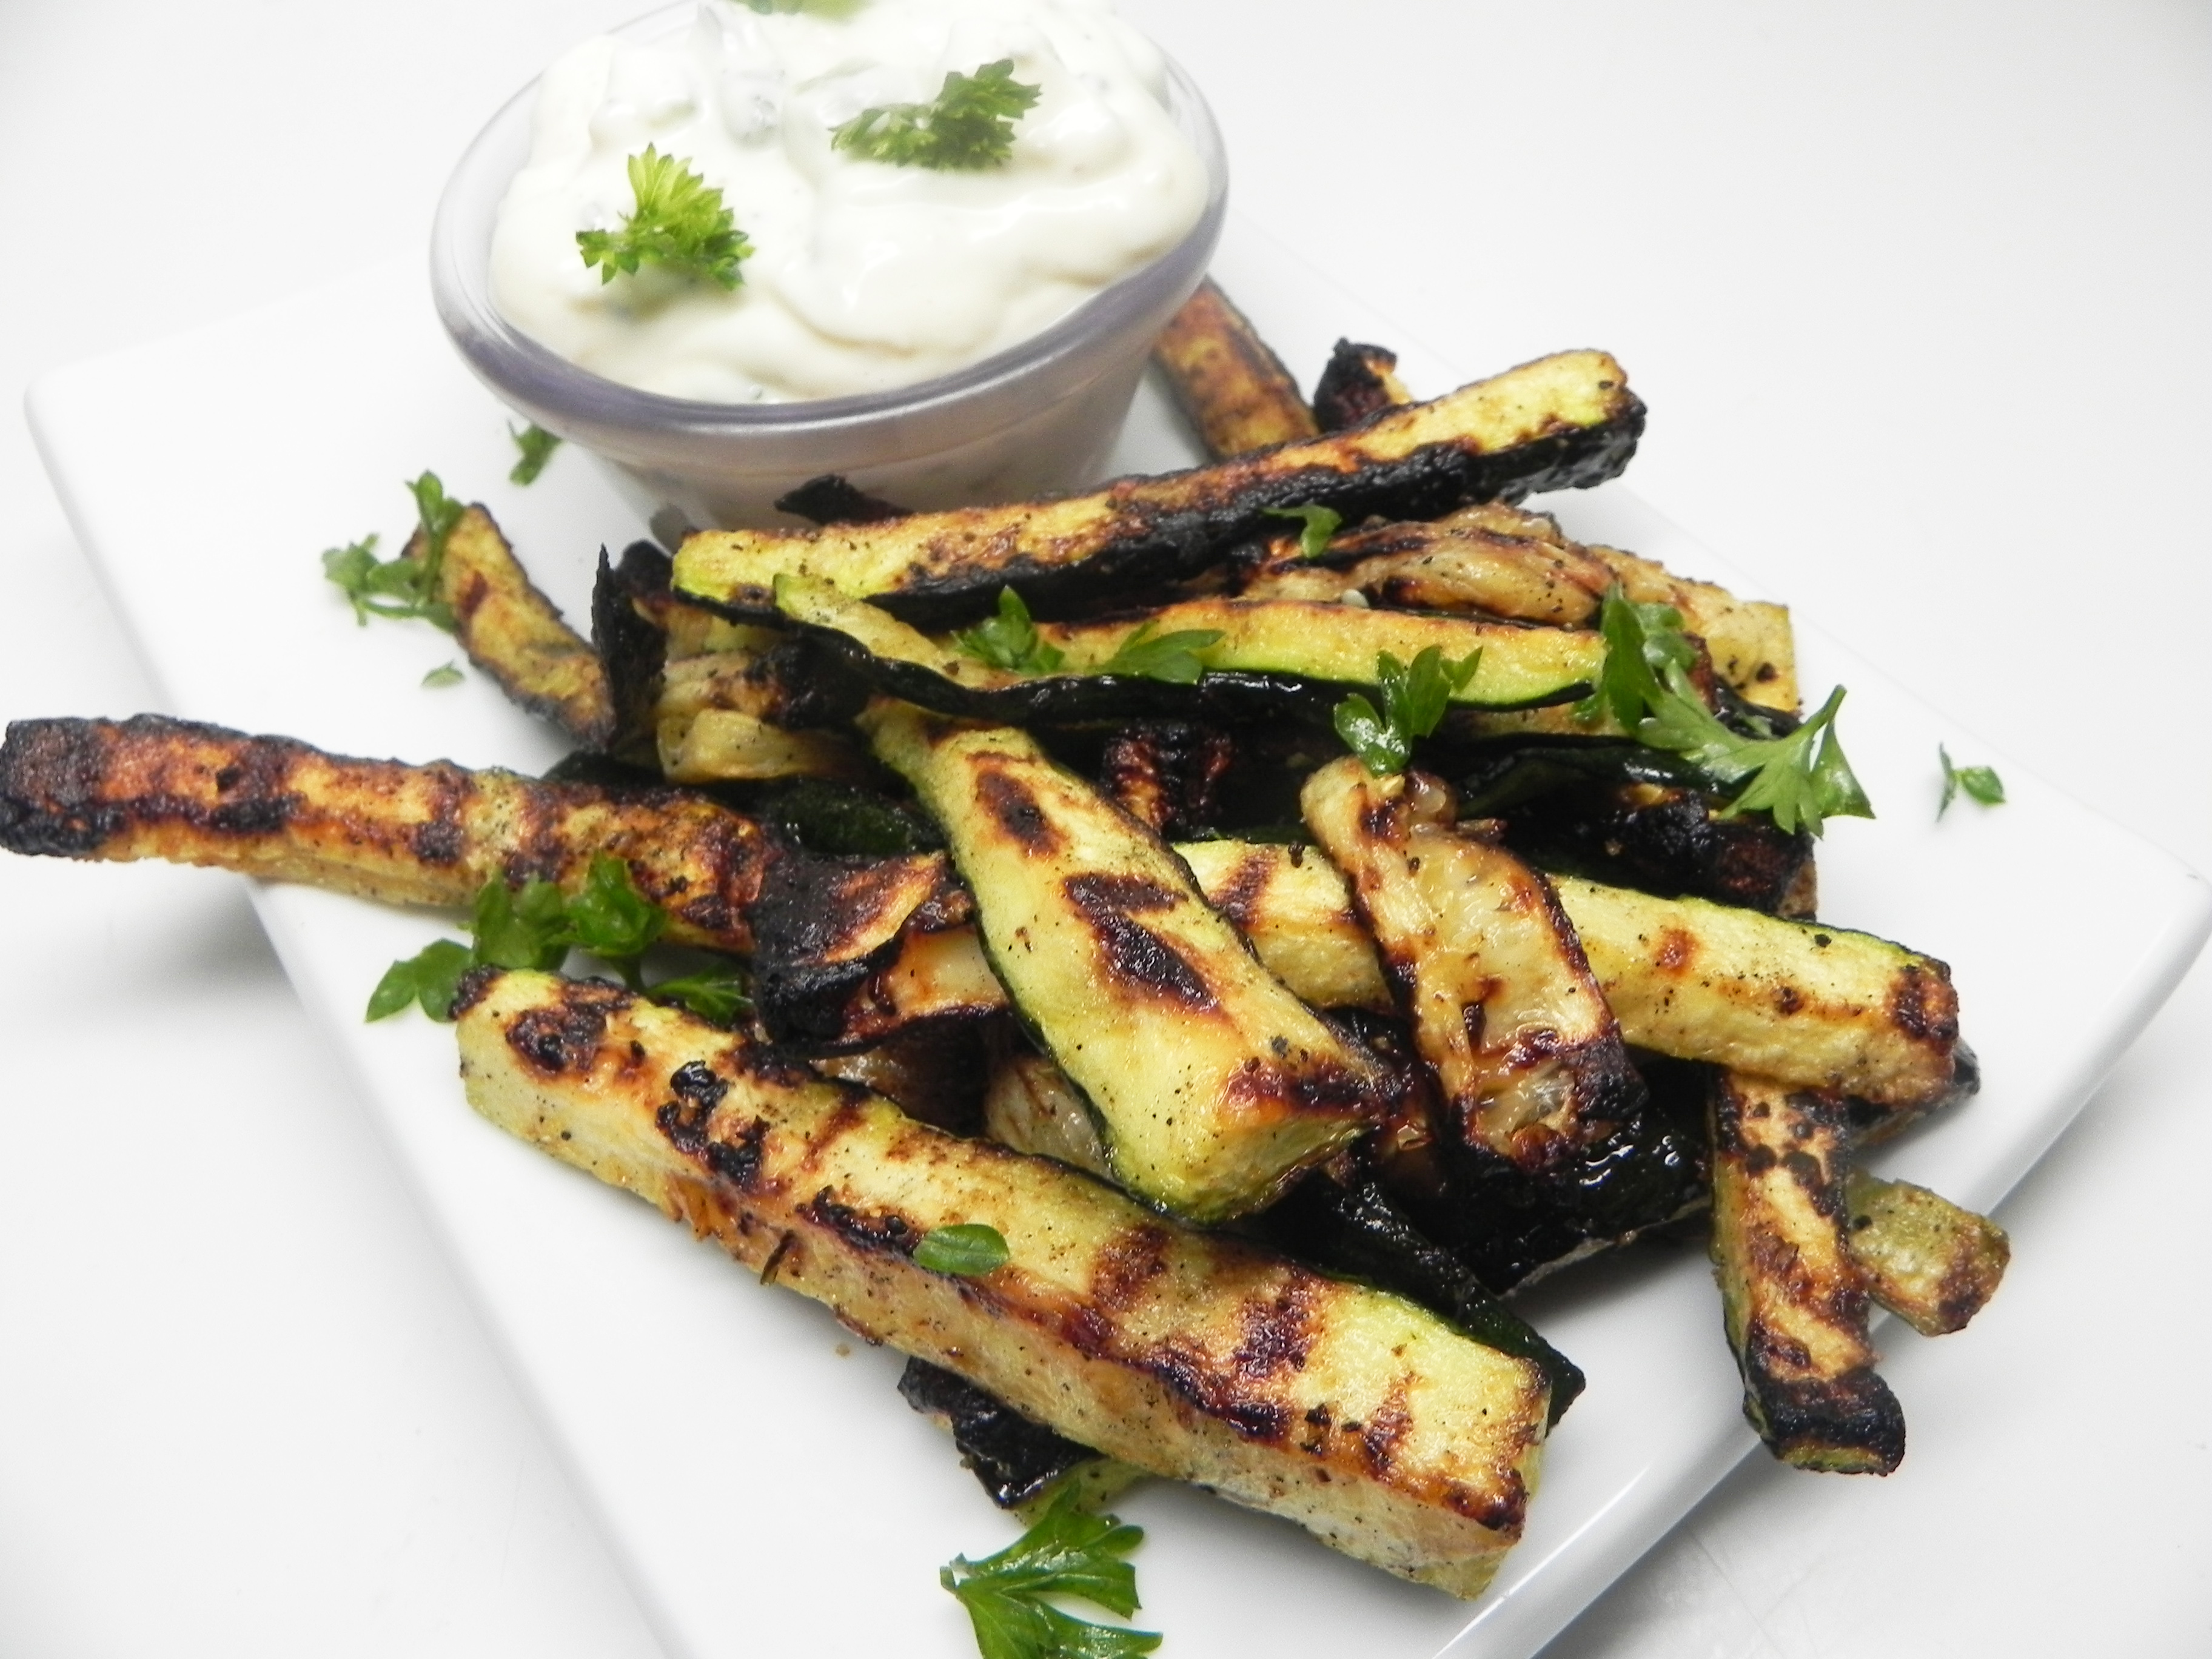 Grilled Zucchini Slices